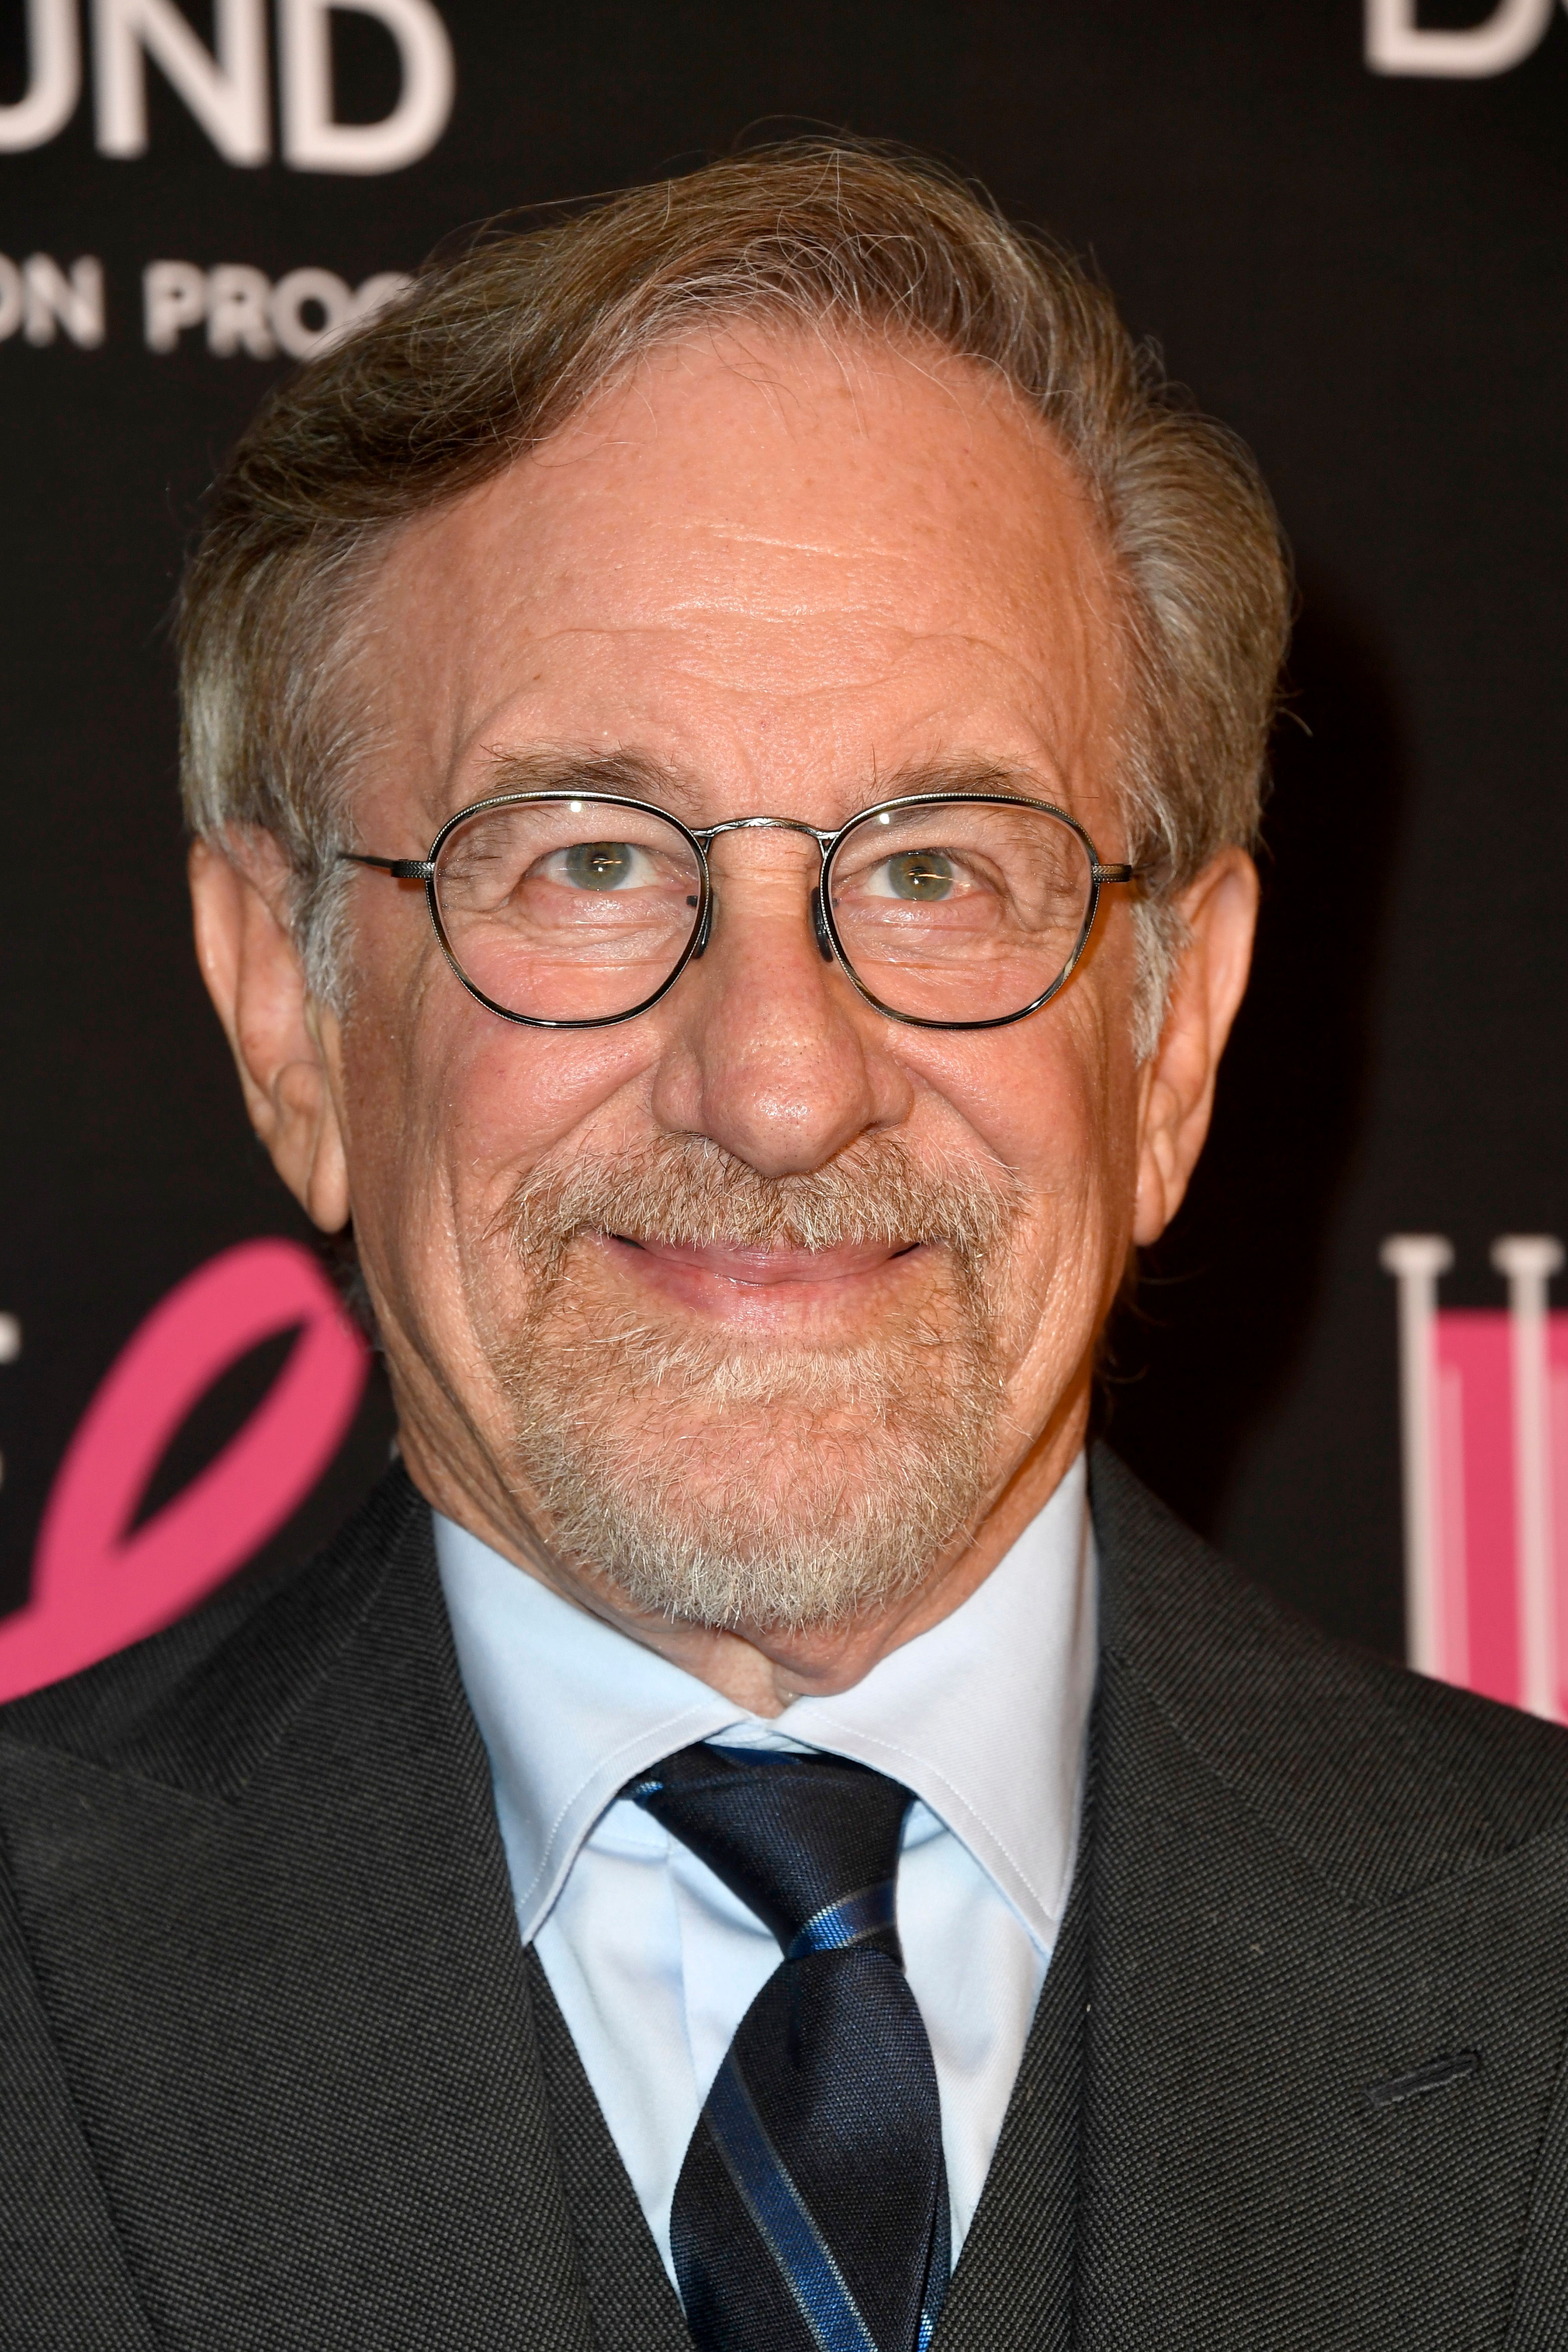 Steven Spielberg during The Women's Cancer Research Fund's An Unforgettable Evening Benefit Gala on February 28, 2019 in Beverly Hills, California. | Source: Getty Images